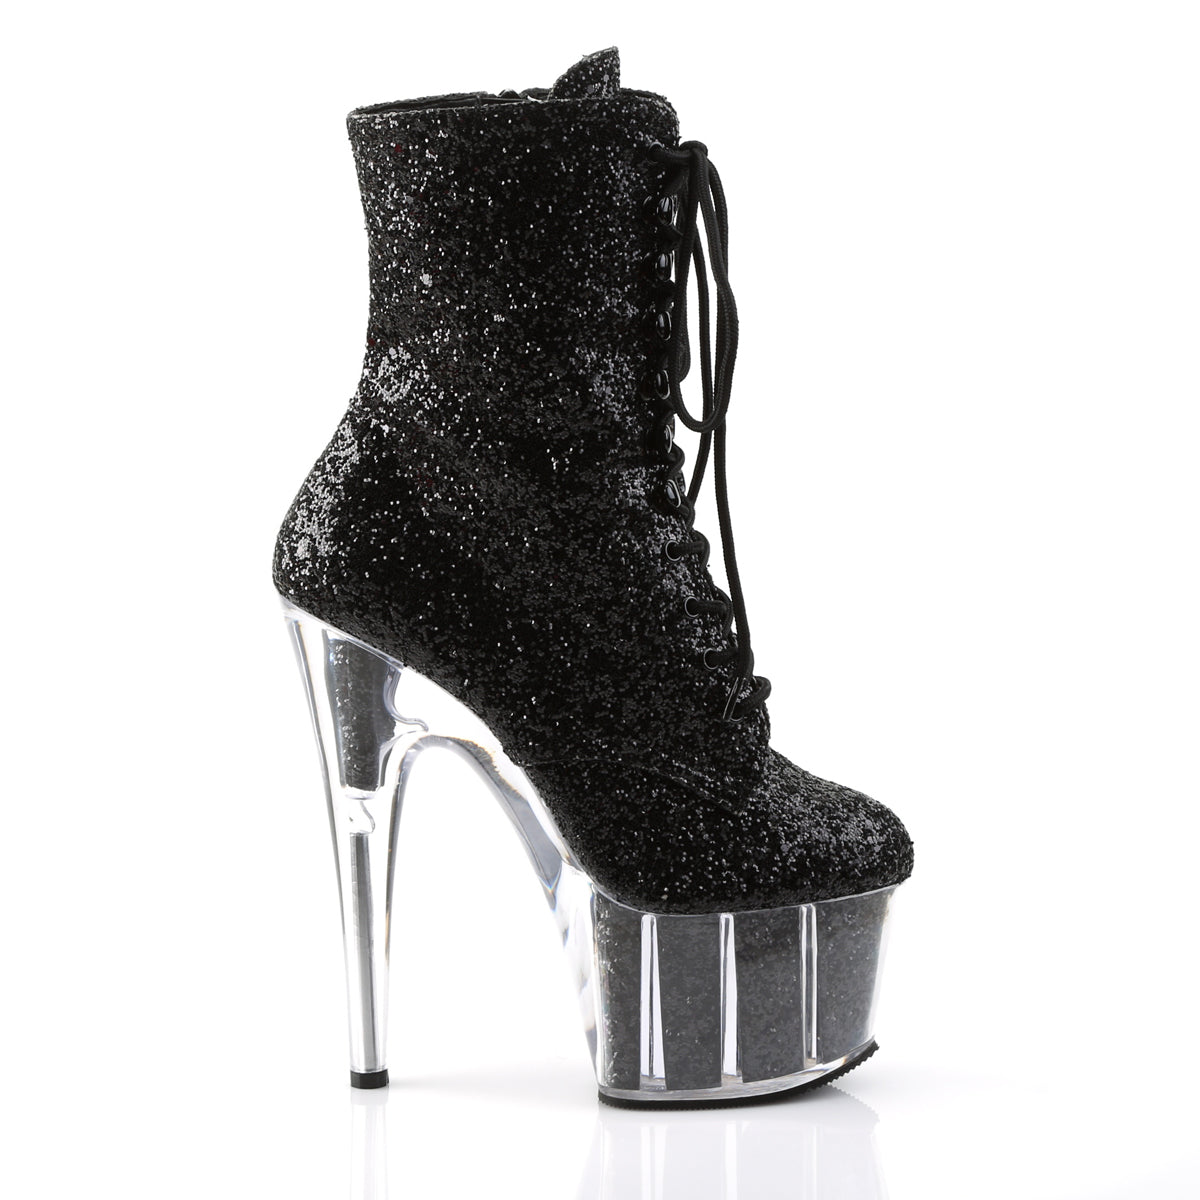 ADORE-1020G 7" Heel Black Glitter Exotic Dancing Ankle Boots-Pleaser- Sexy Shoes Fetish Heels